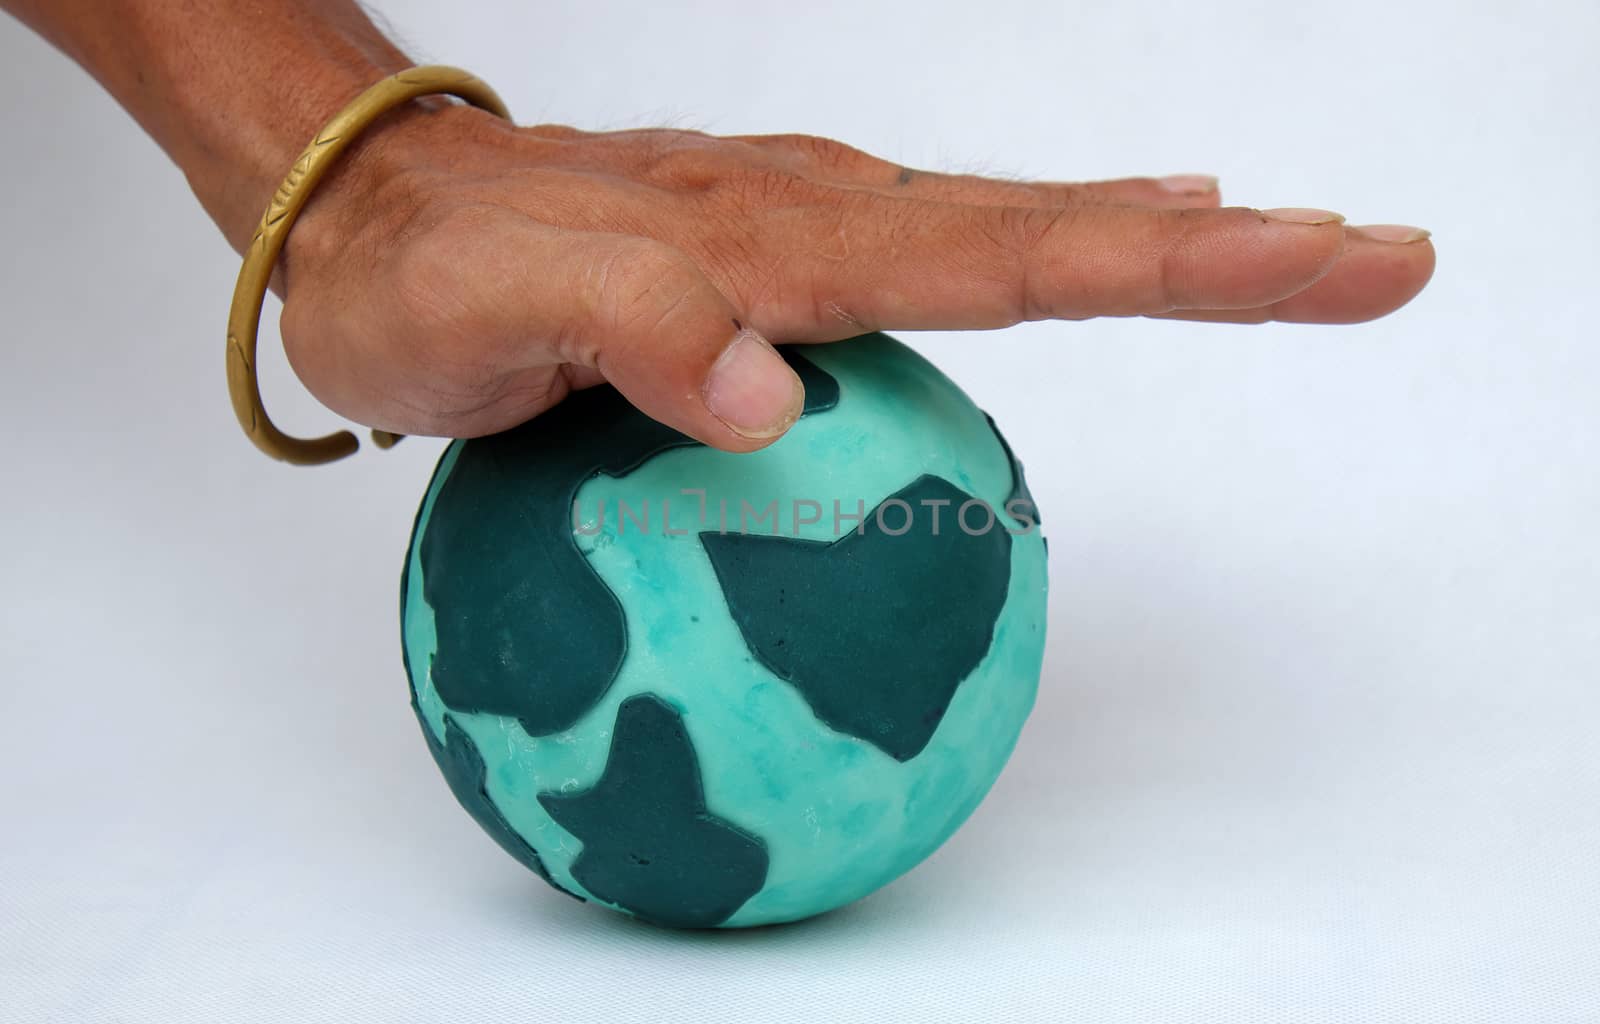 Concept for destroy the earth by human hand on white background, human ruin green planet, is worldwide problem, can make climate change, disaster, damaged environment